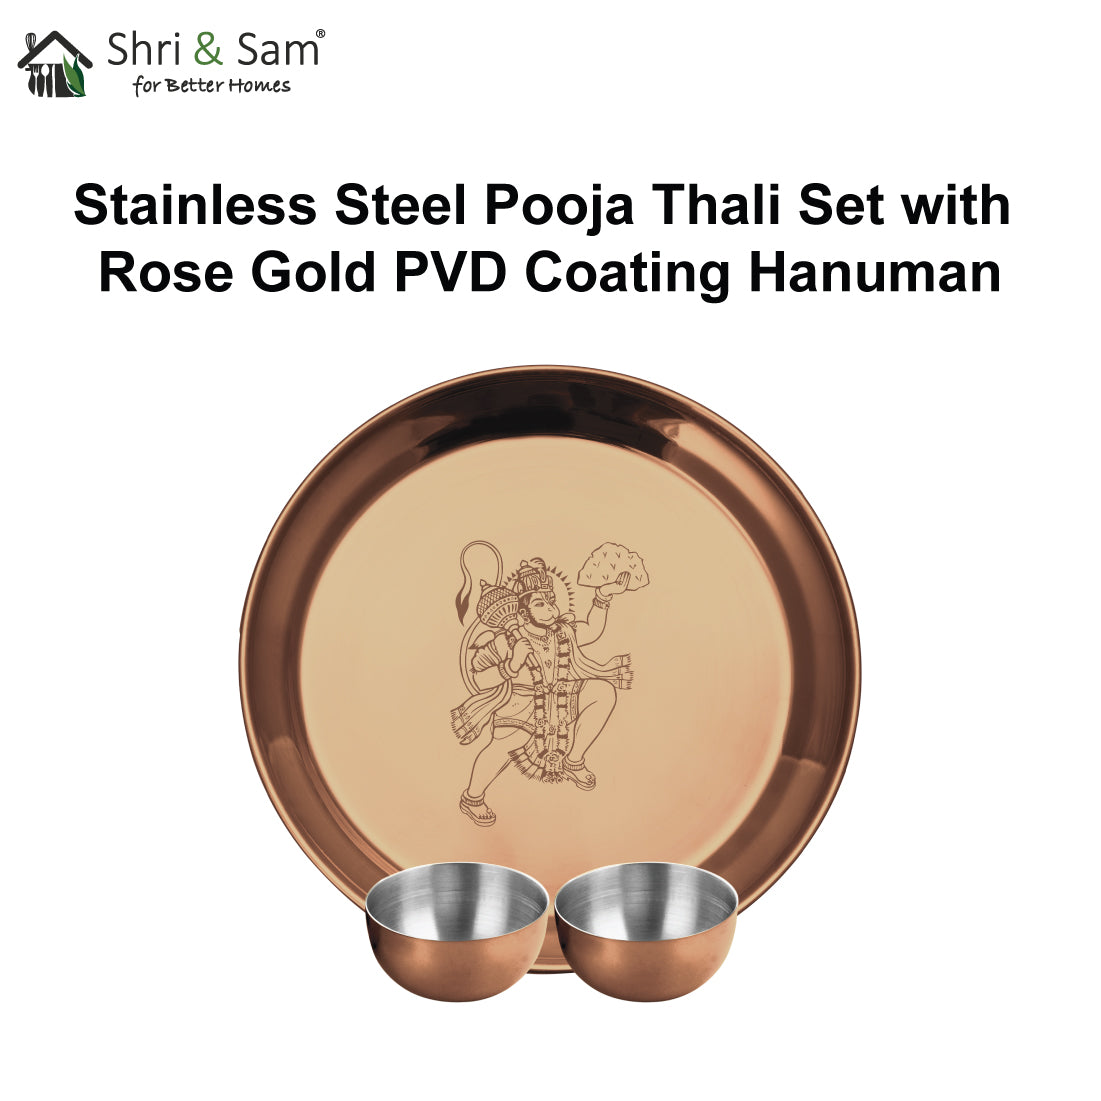 Stainless Steel Pooja Thali Set with Rose Gold PVD Coating Hanuman